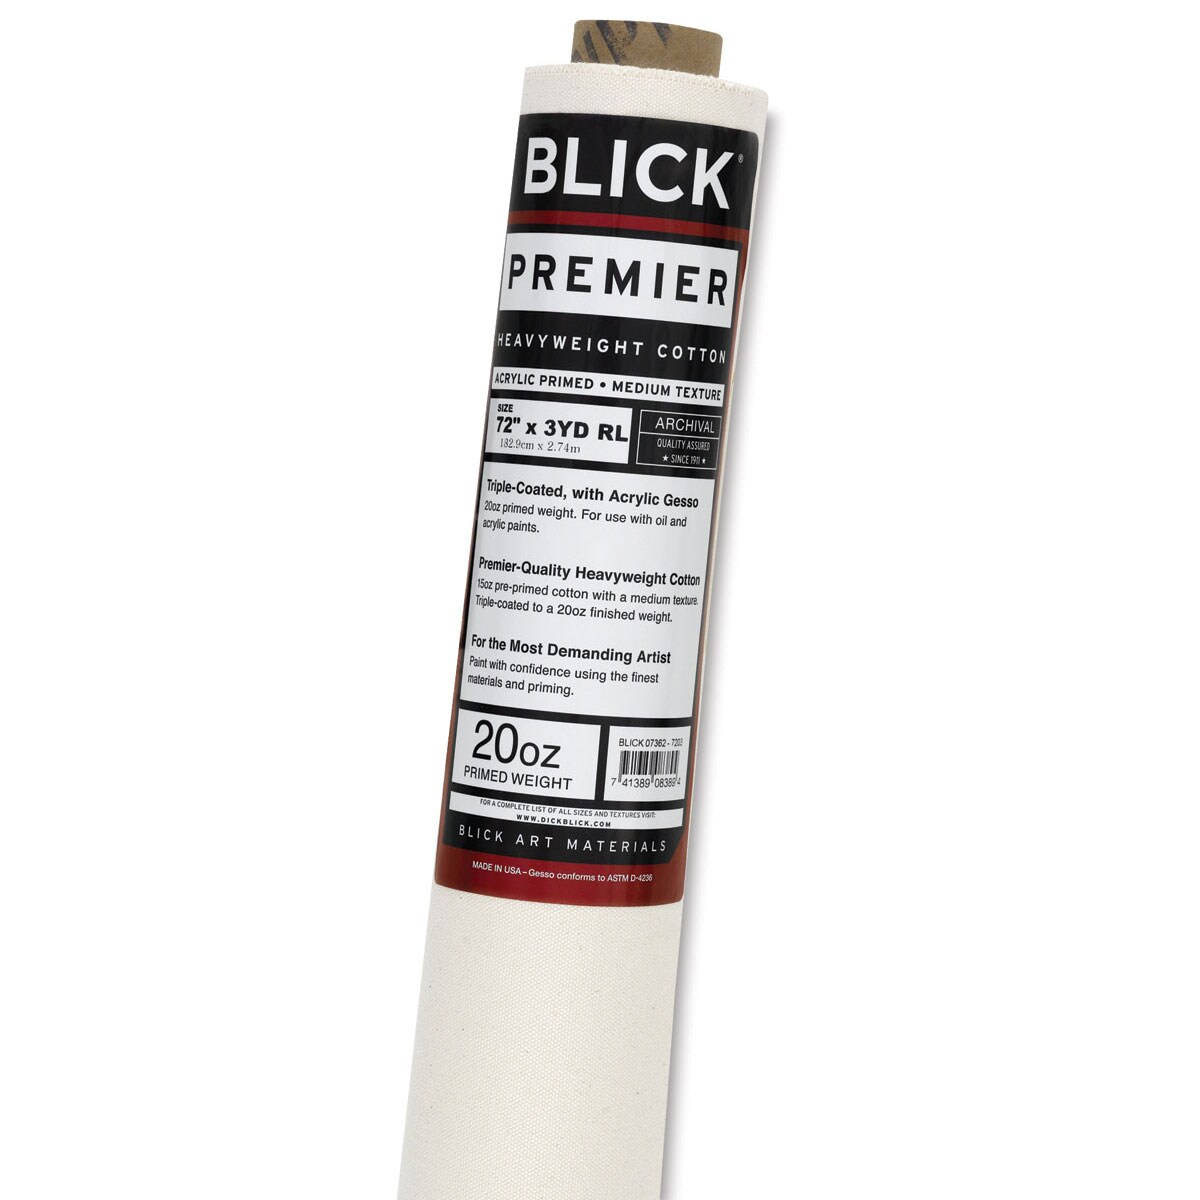 Blick Acrylic Primed Cotton Canvas - Premier Heavyweight, 72&#x22; x 3 yd, Acrylic Primed, by the Roll